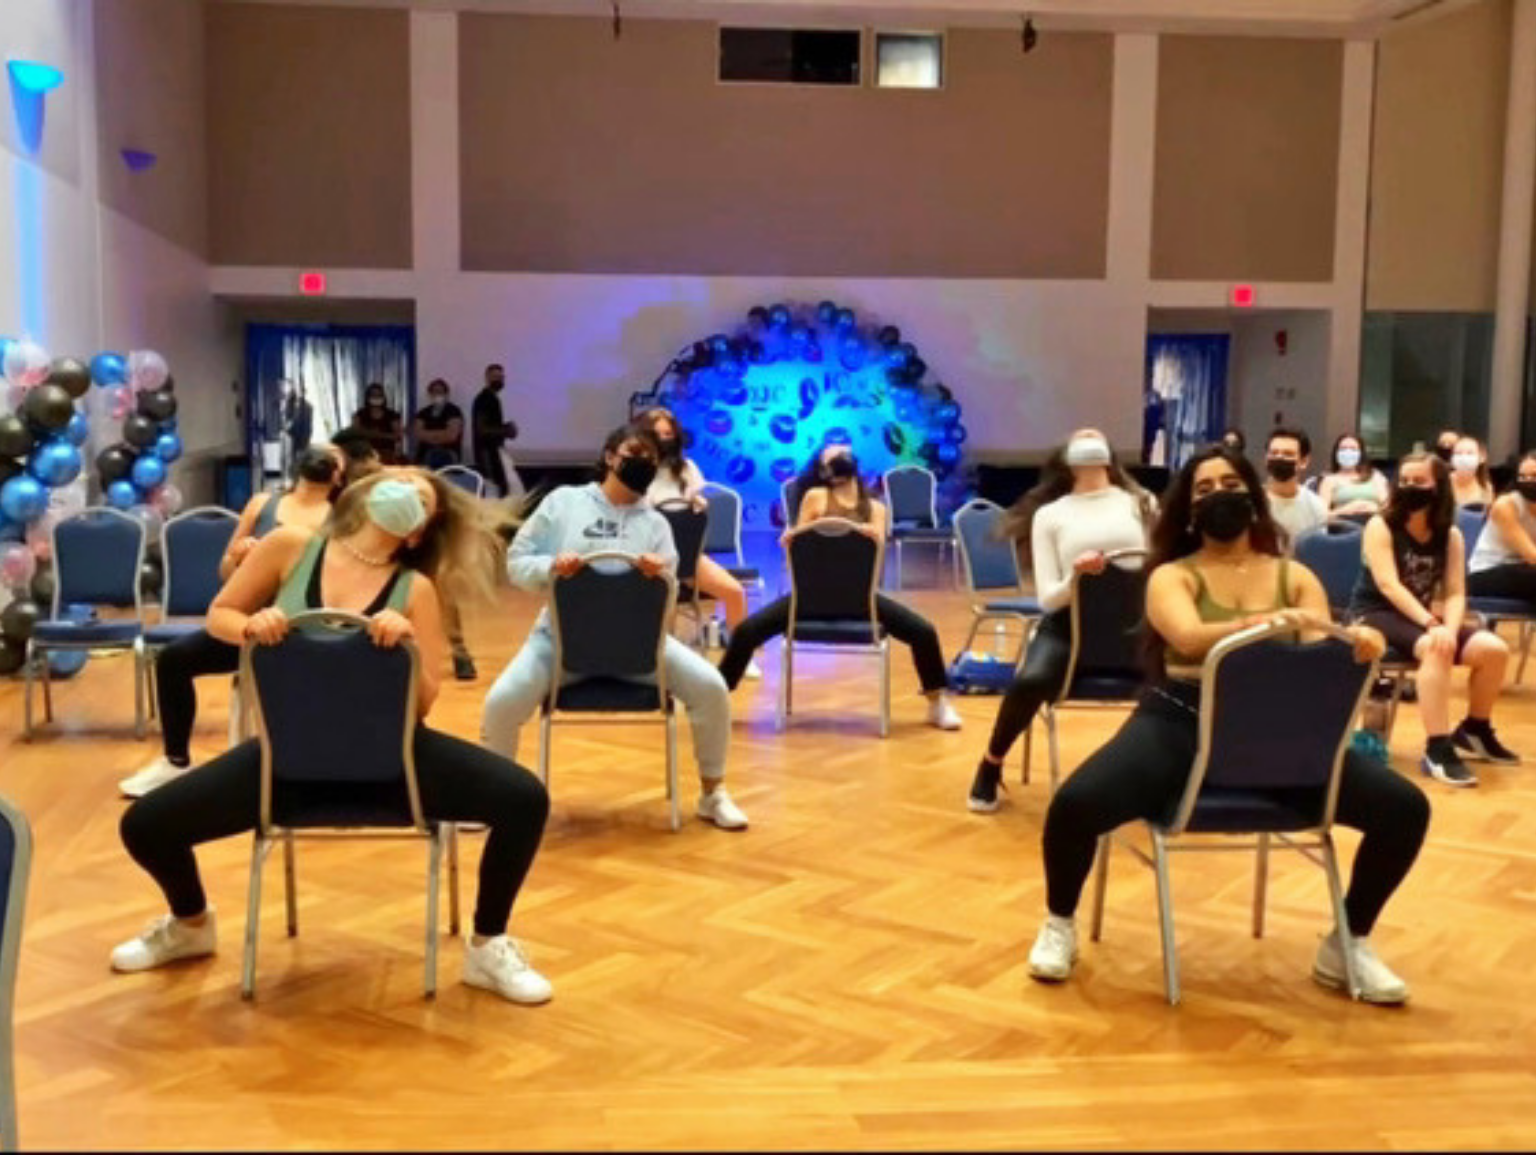 Students at the chair dancing event participate in a chair dancing class led by a facilitator from Pole Pressure